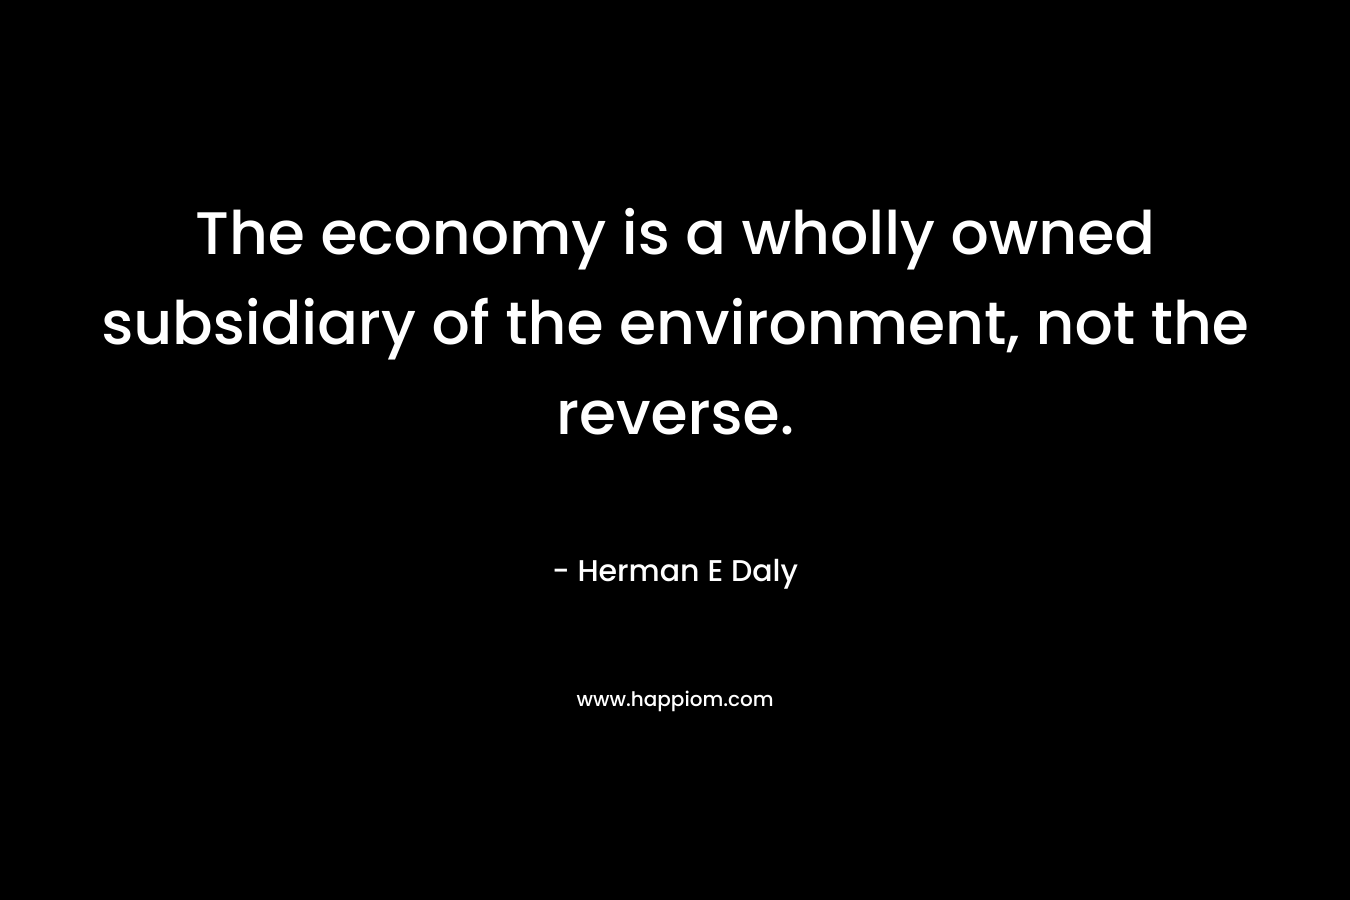 The economy is a wholly owned subsidiary of the environment, not the reverse.